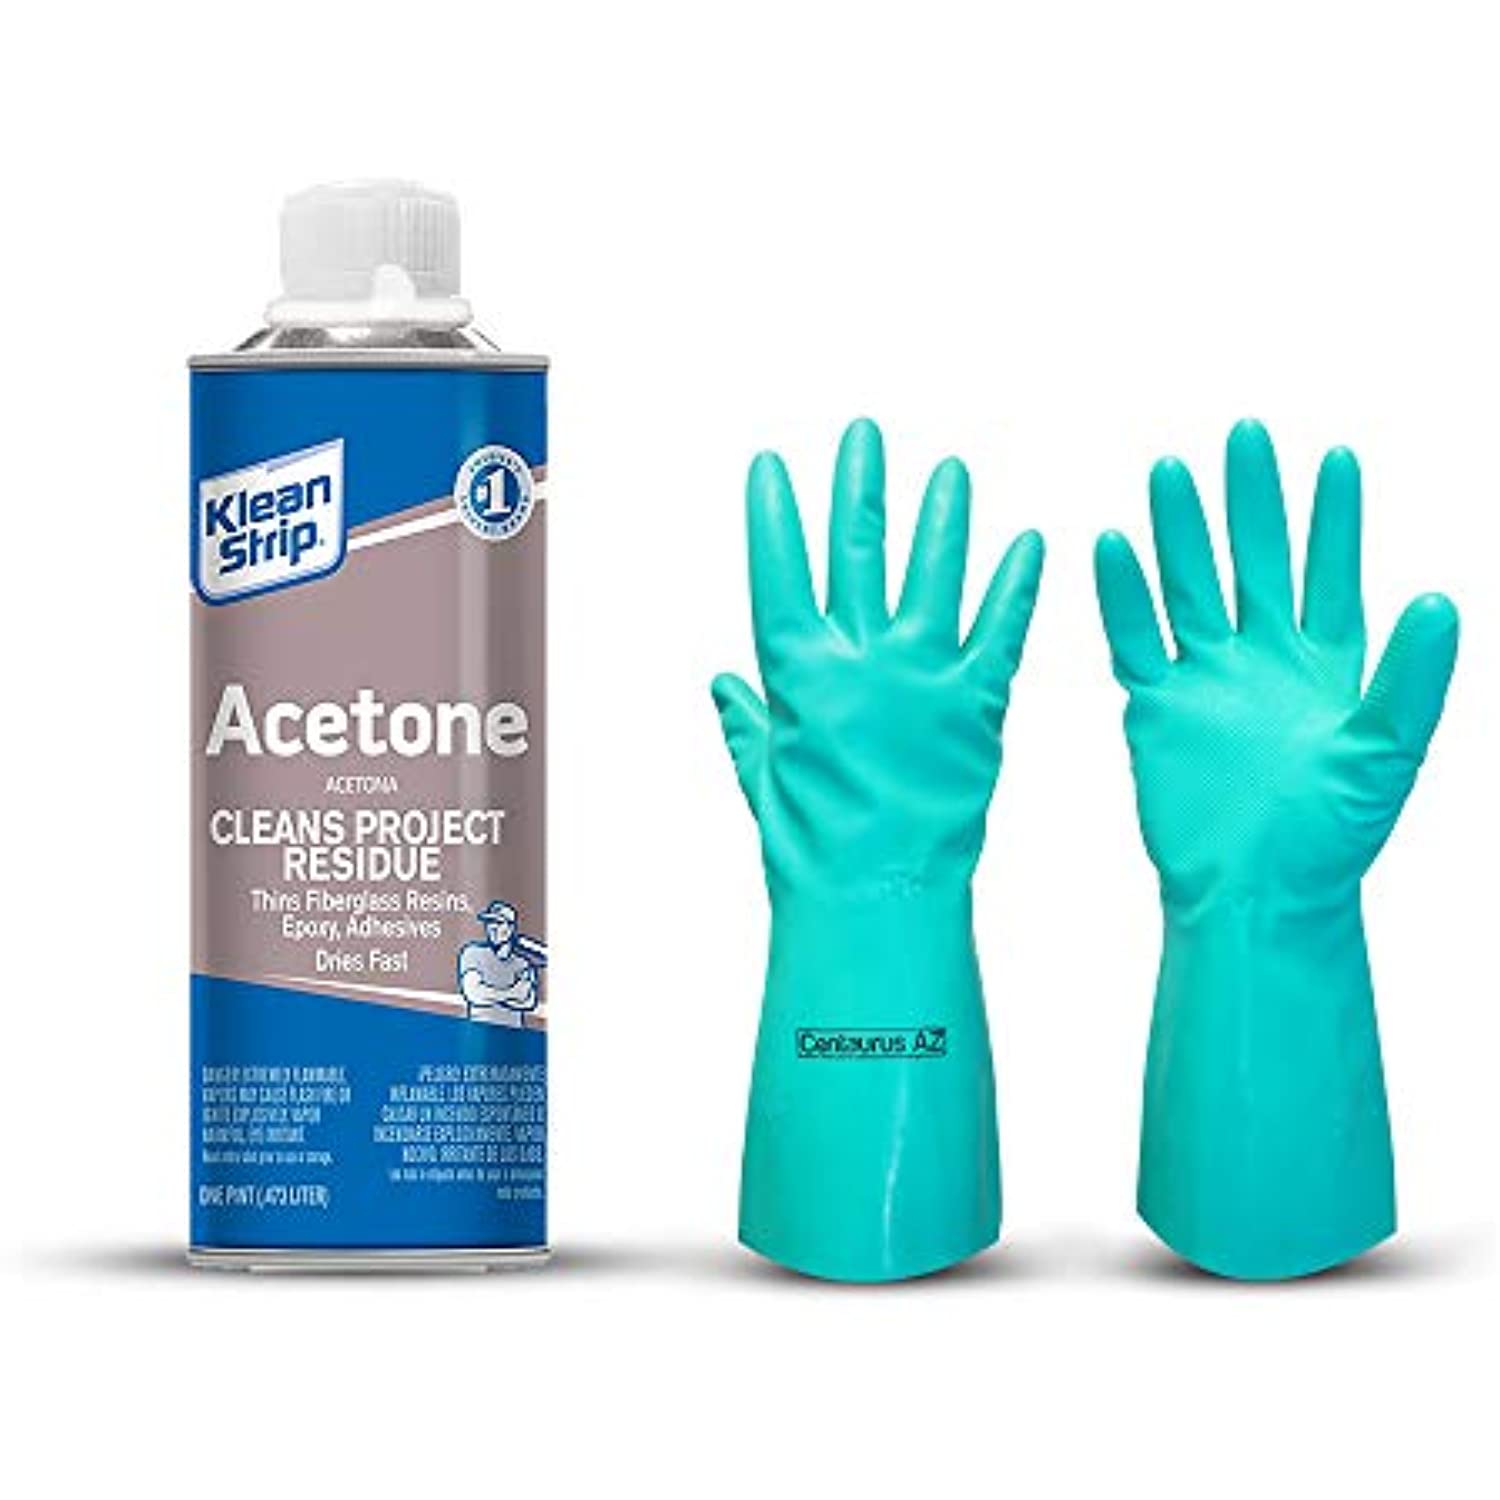 Klean-Strip 16 Ounce Acetone Strong Fast-Acting Thinning Cleaning Fiberglass Epoxy Resins Adhesives Heavy Duty Degreaser 95% Pure Low VOC with Chemical Resistant Gloves by Centaurus AZ